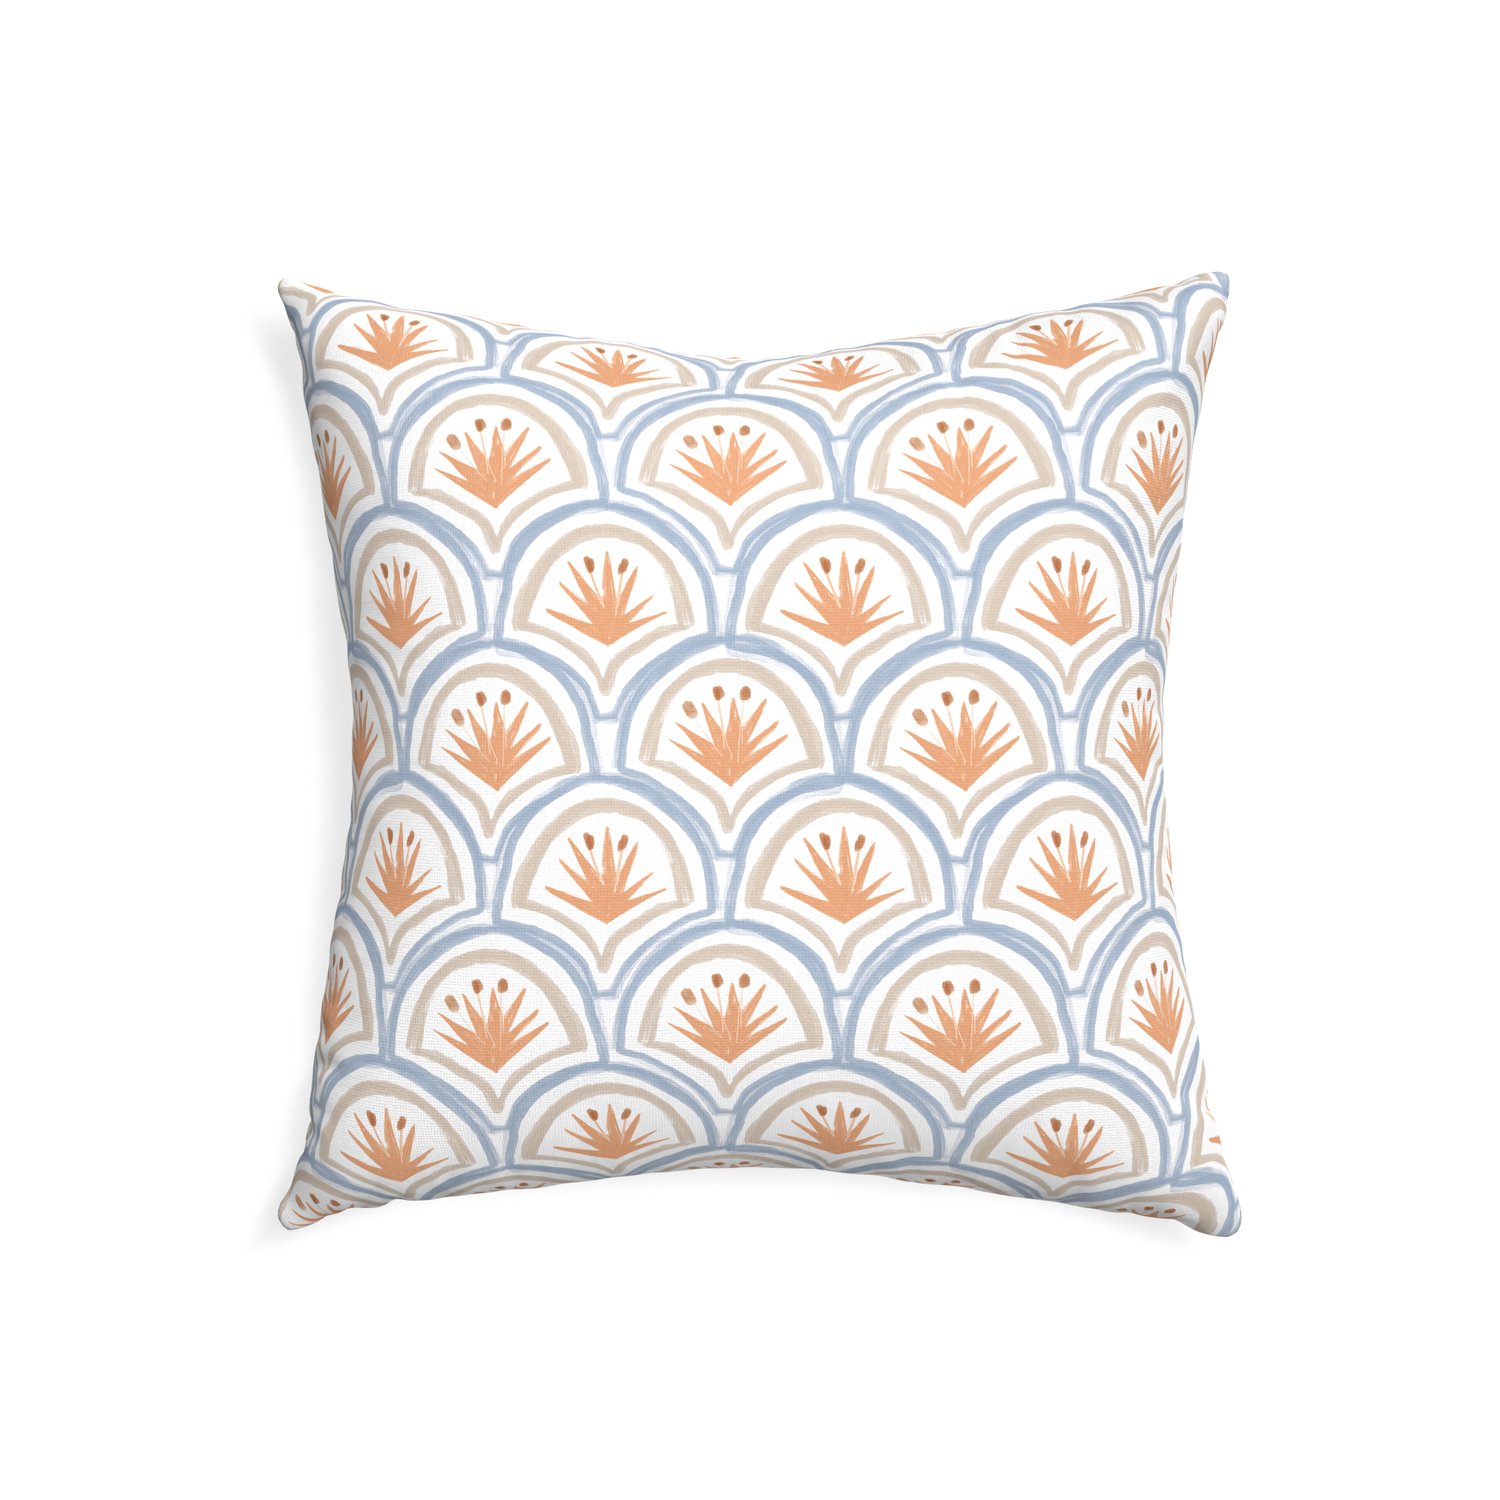 22-square thatcher apricot custom art deco palm patternpillow with none on white background